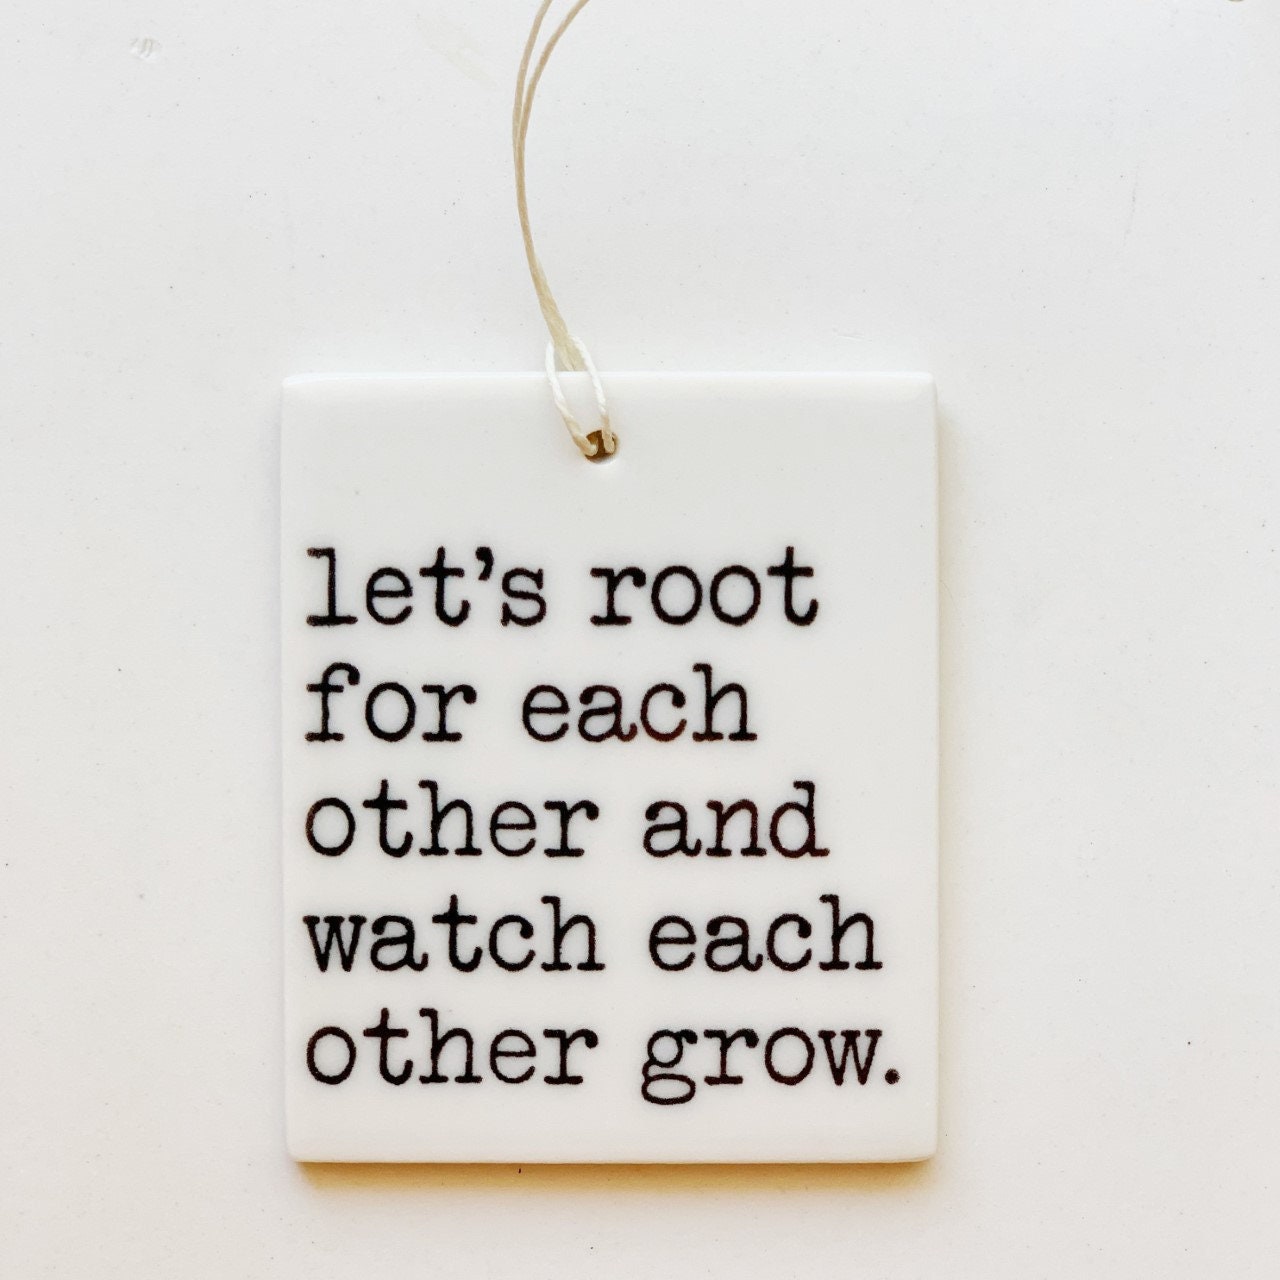 let's root for each other and watch each other grow | ceramic wall tag | ceramic wall art | meaningful gift | family | encouragement